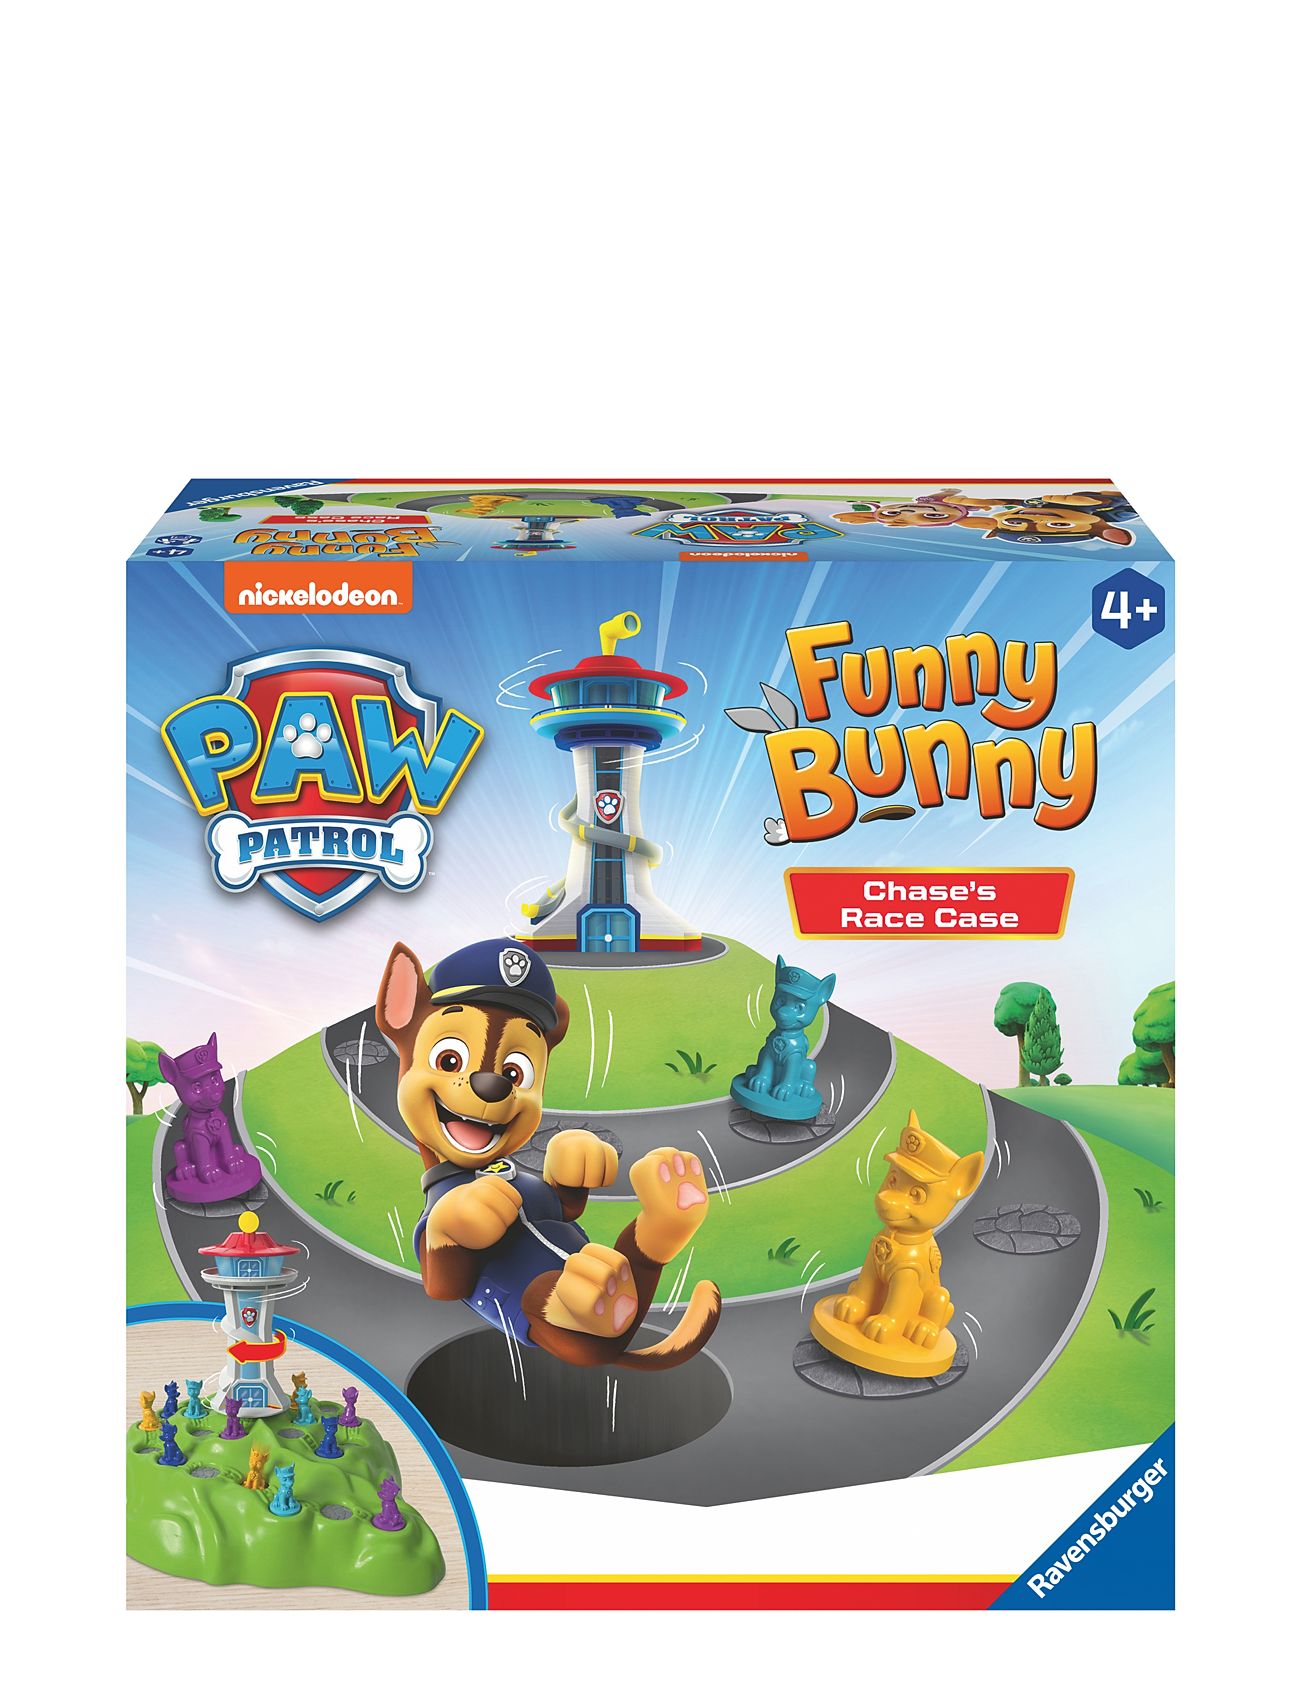 Paw Patrol Funny Race Sv/Da/No/Fi/Is Toys Puzzles And Games Games Board Games Multi/patterned Ravensburger